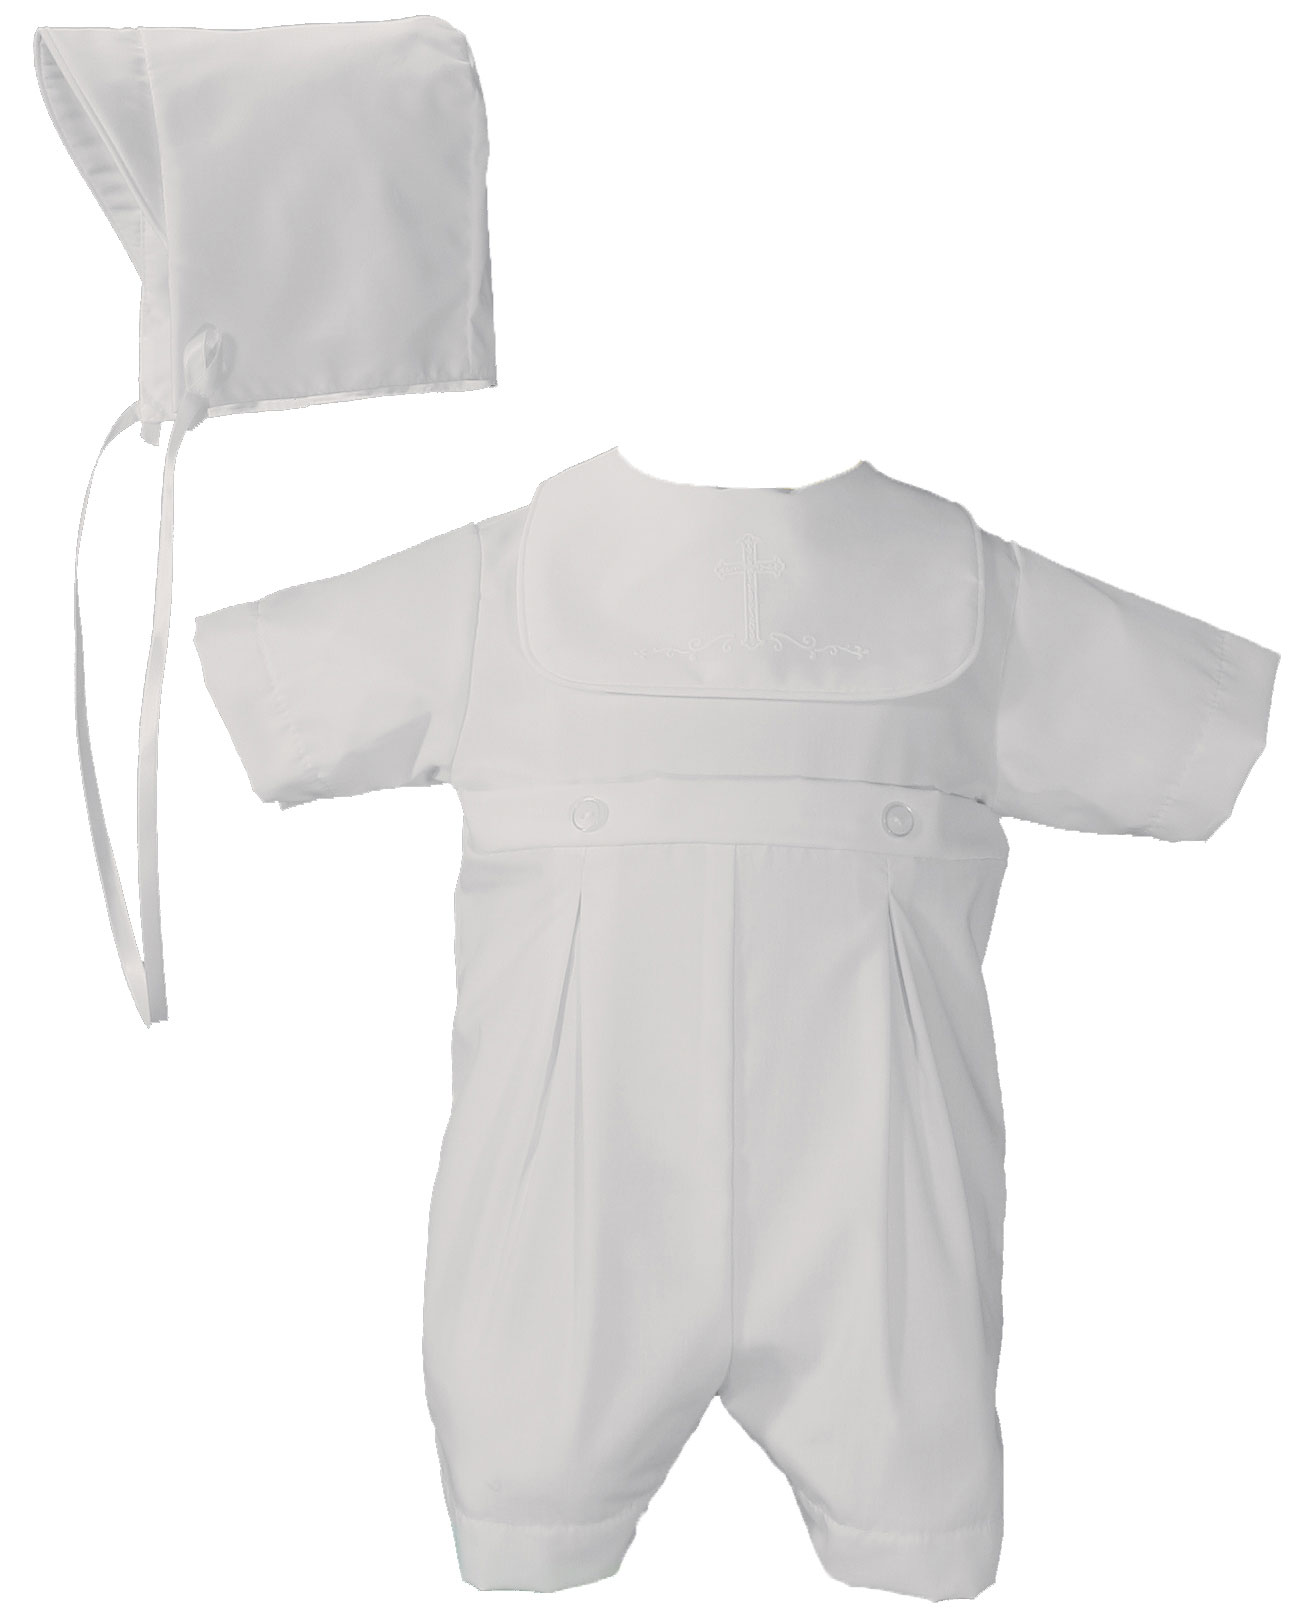 Boys White Polycotton Christening Baptism Romper with Screened Cross - Little Things Mean a Lot